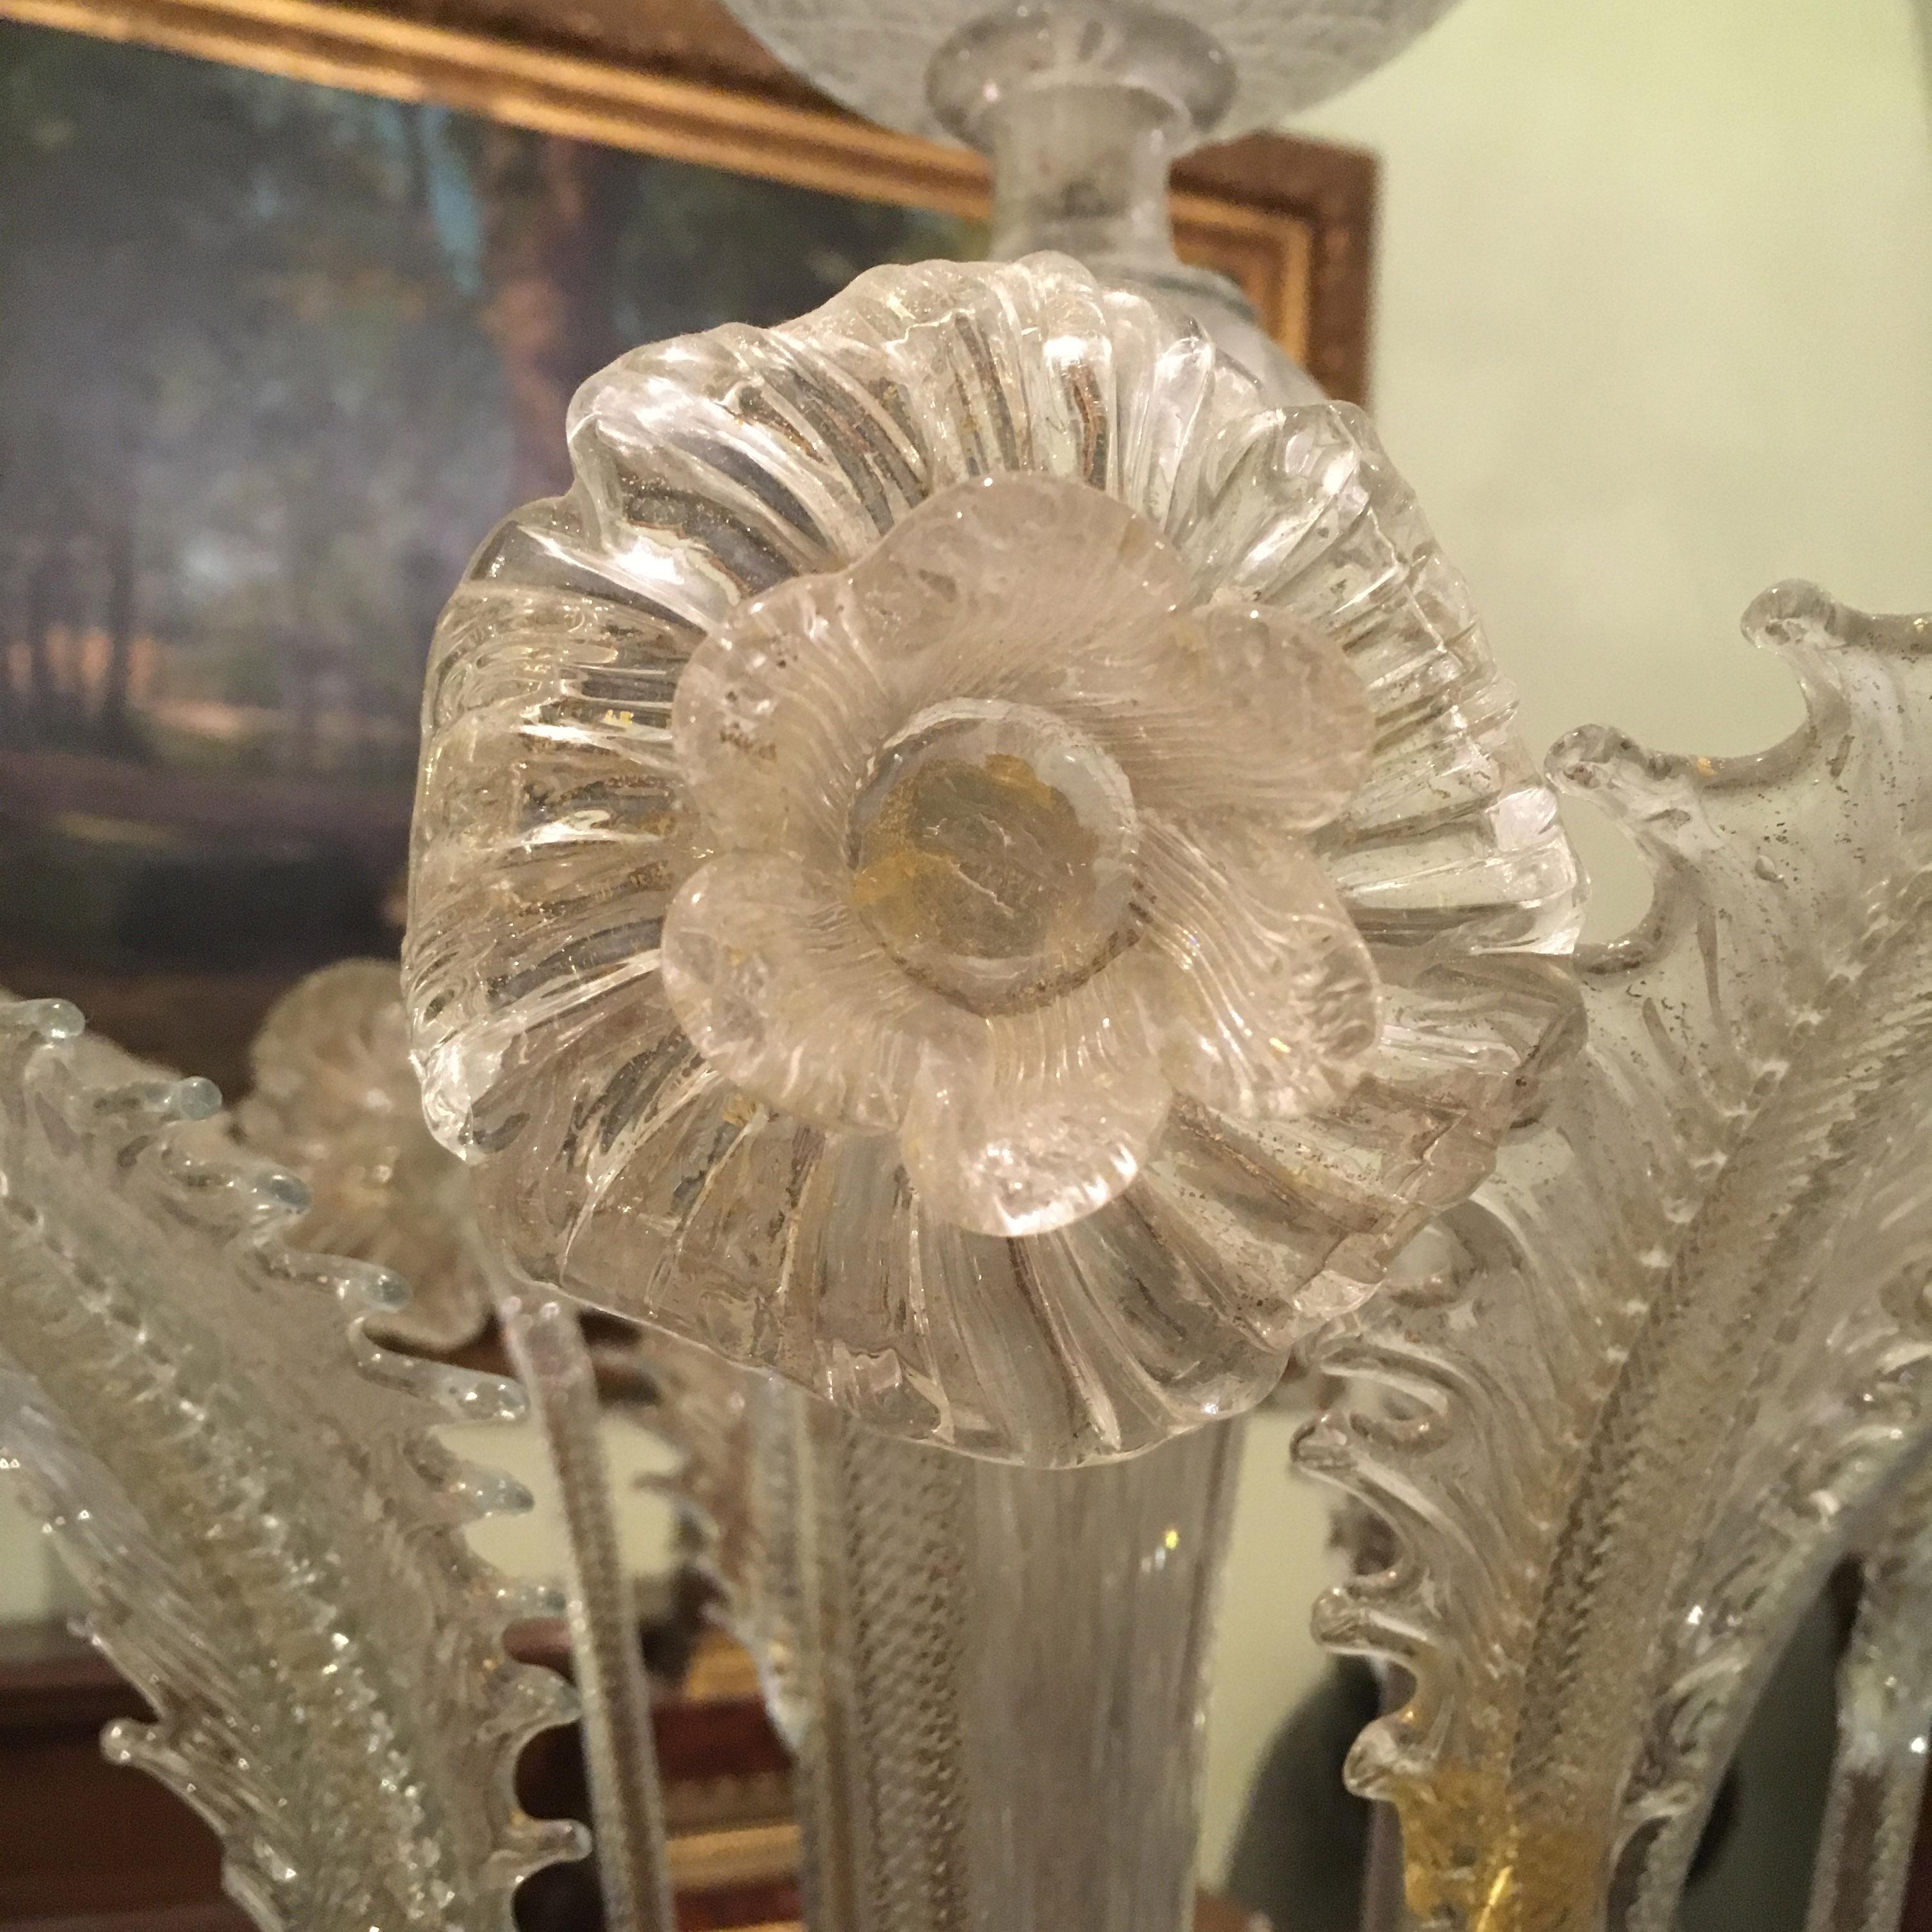 Mid-20th Century Italian Murano Glass Candelabra Floor Lamp In Good Condition For Sale In Firenze, Tuscany